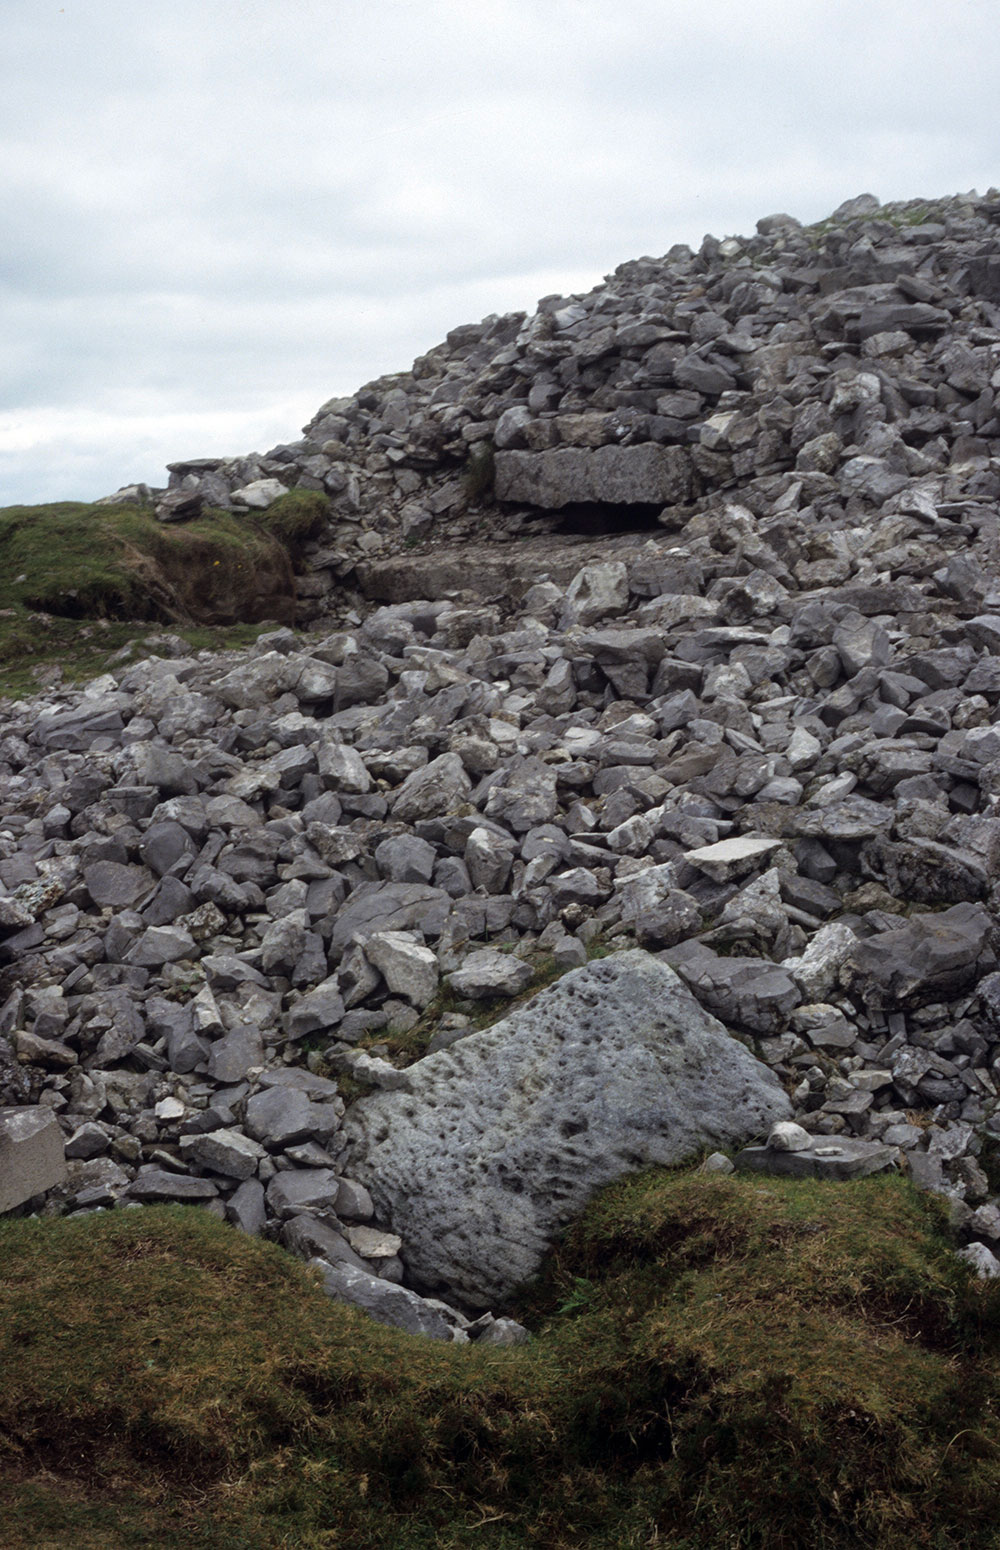 The roof-box at Cairn G in Carrowkeel, an early model for the famous and contraversial example at Newgrange.